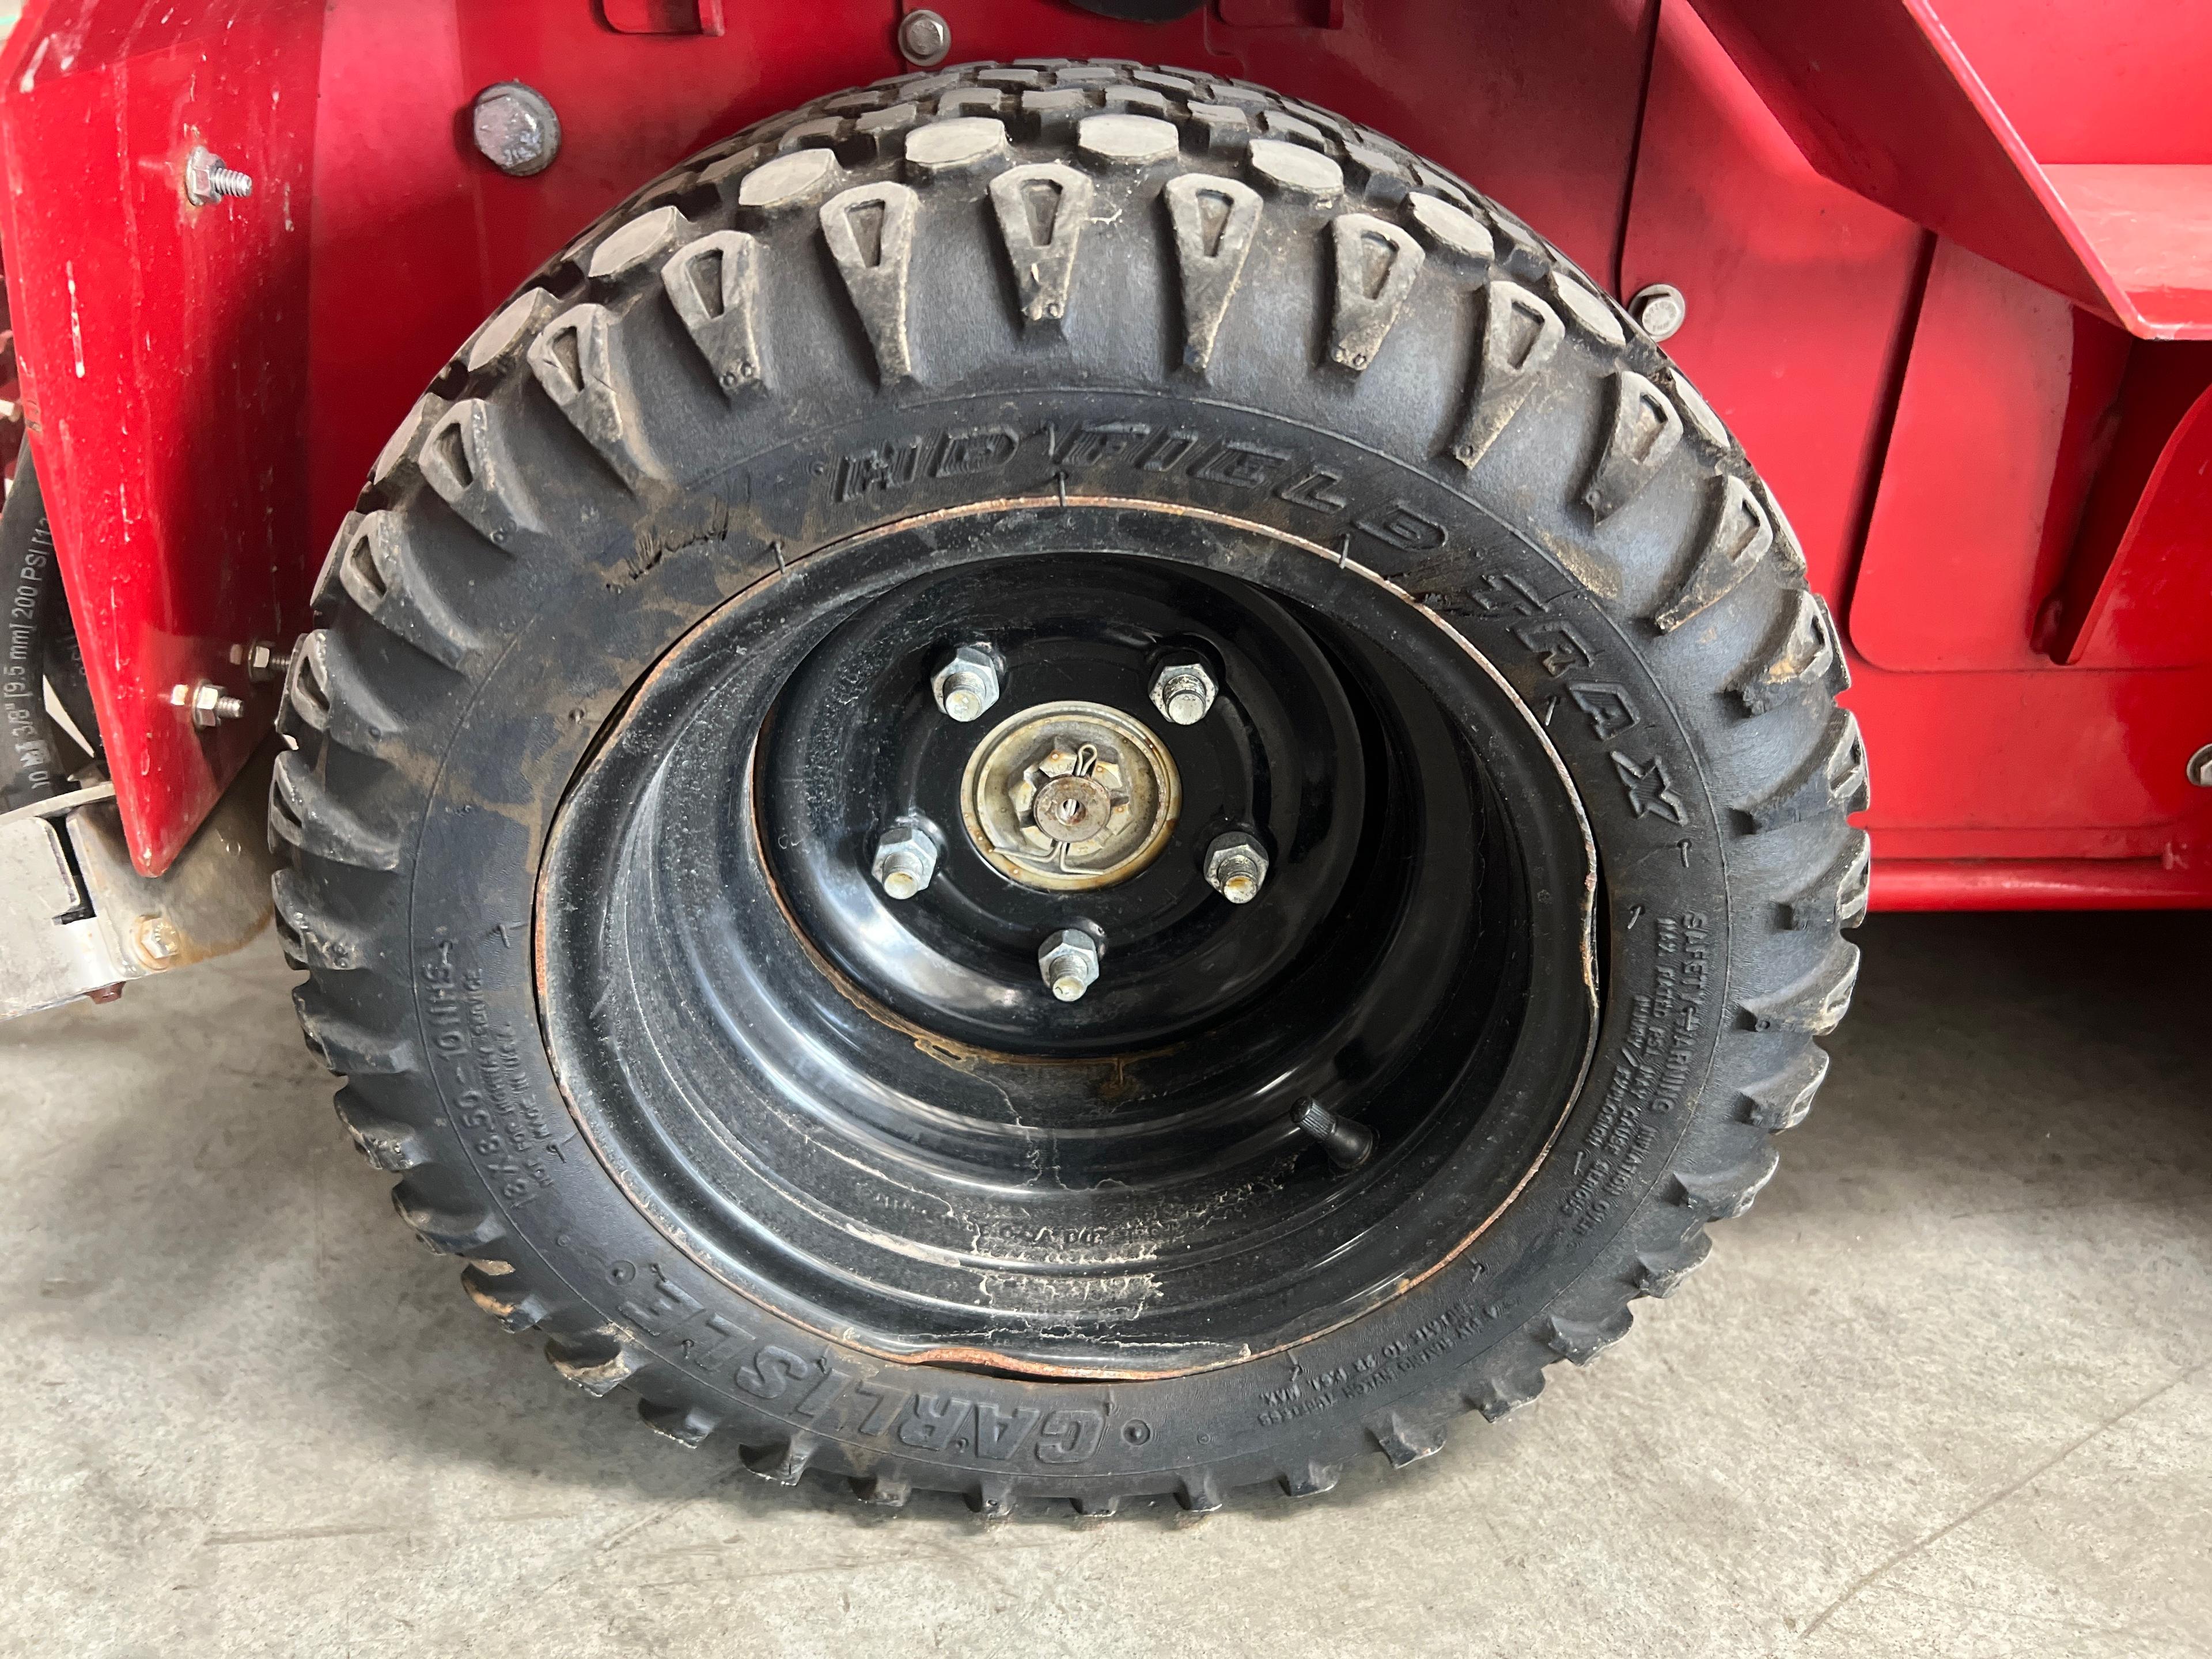 2019 Ventrac Stand-up Ssv